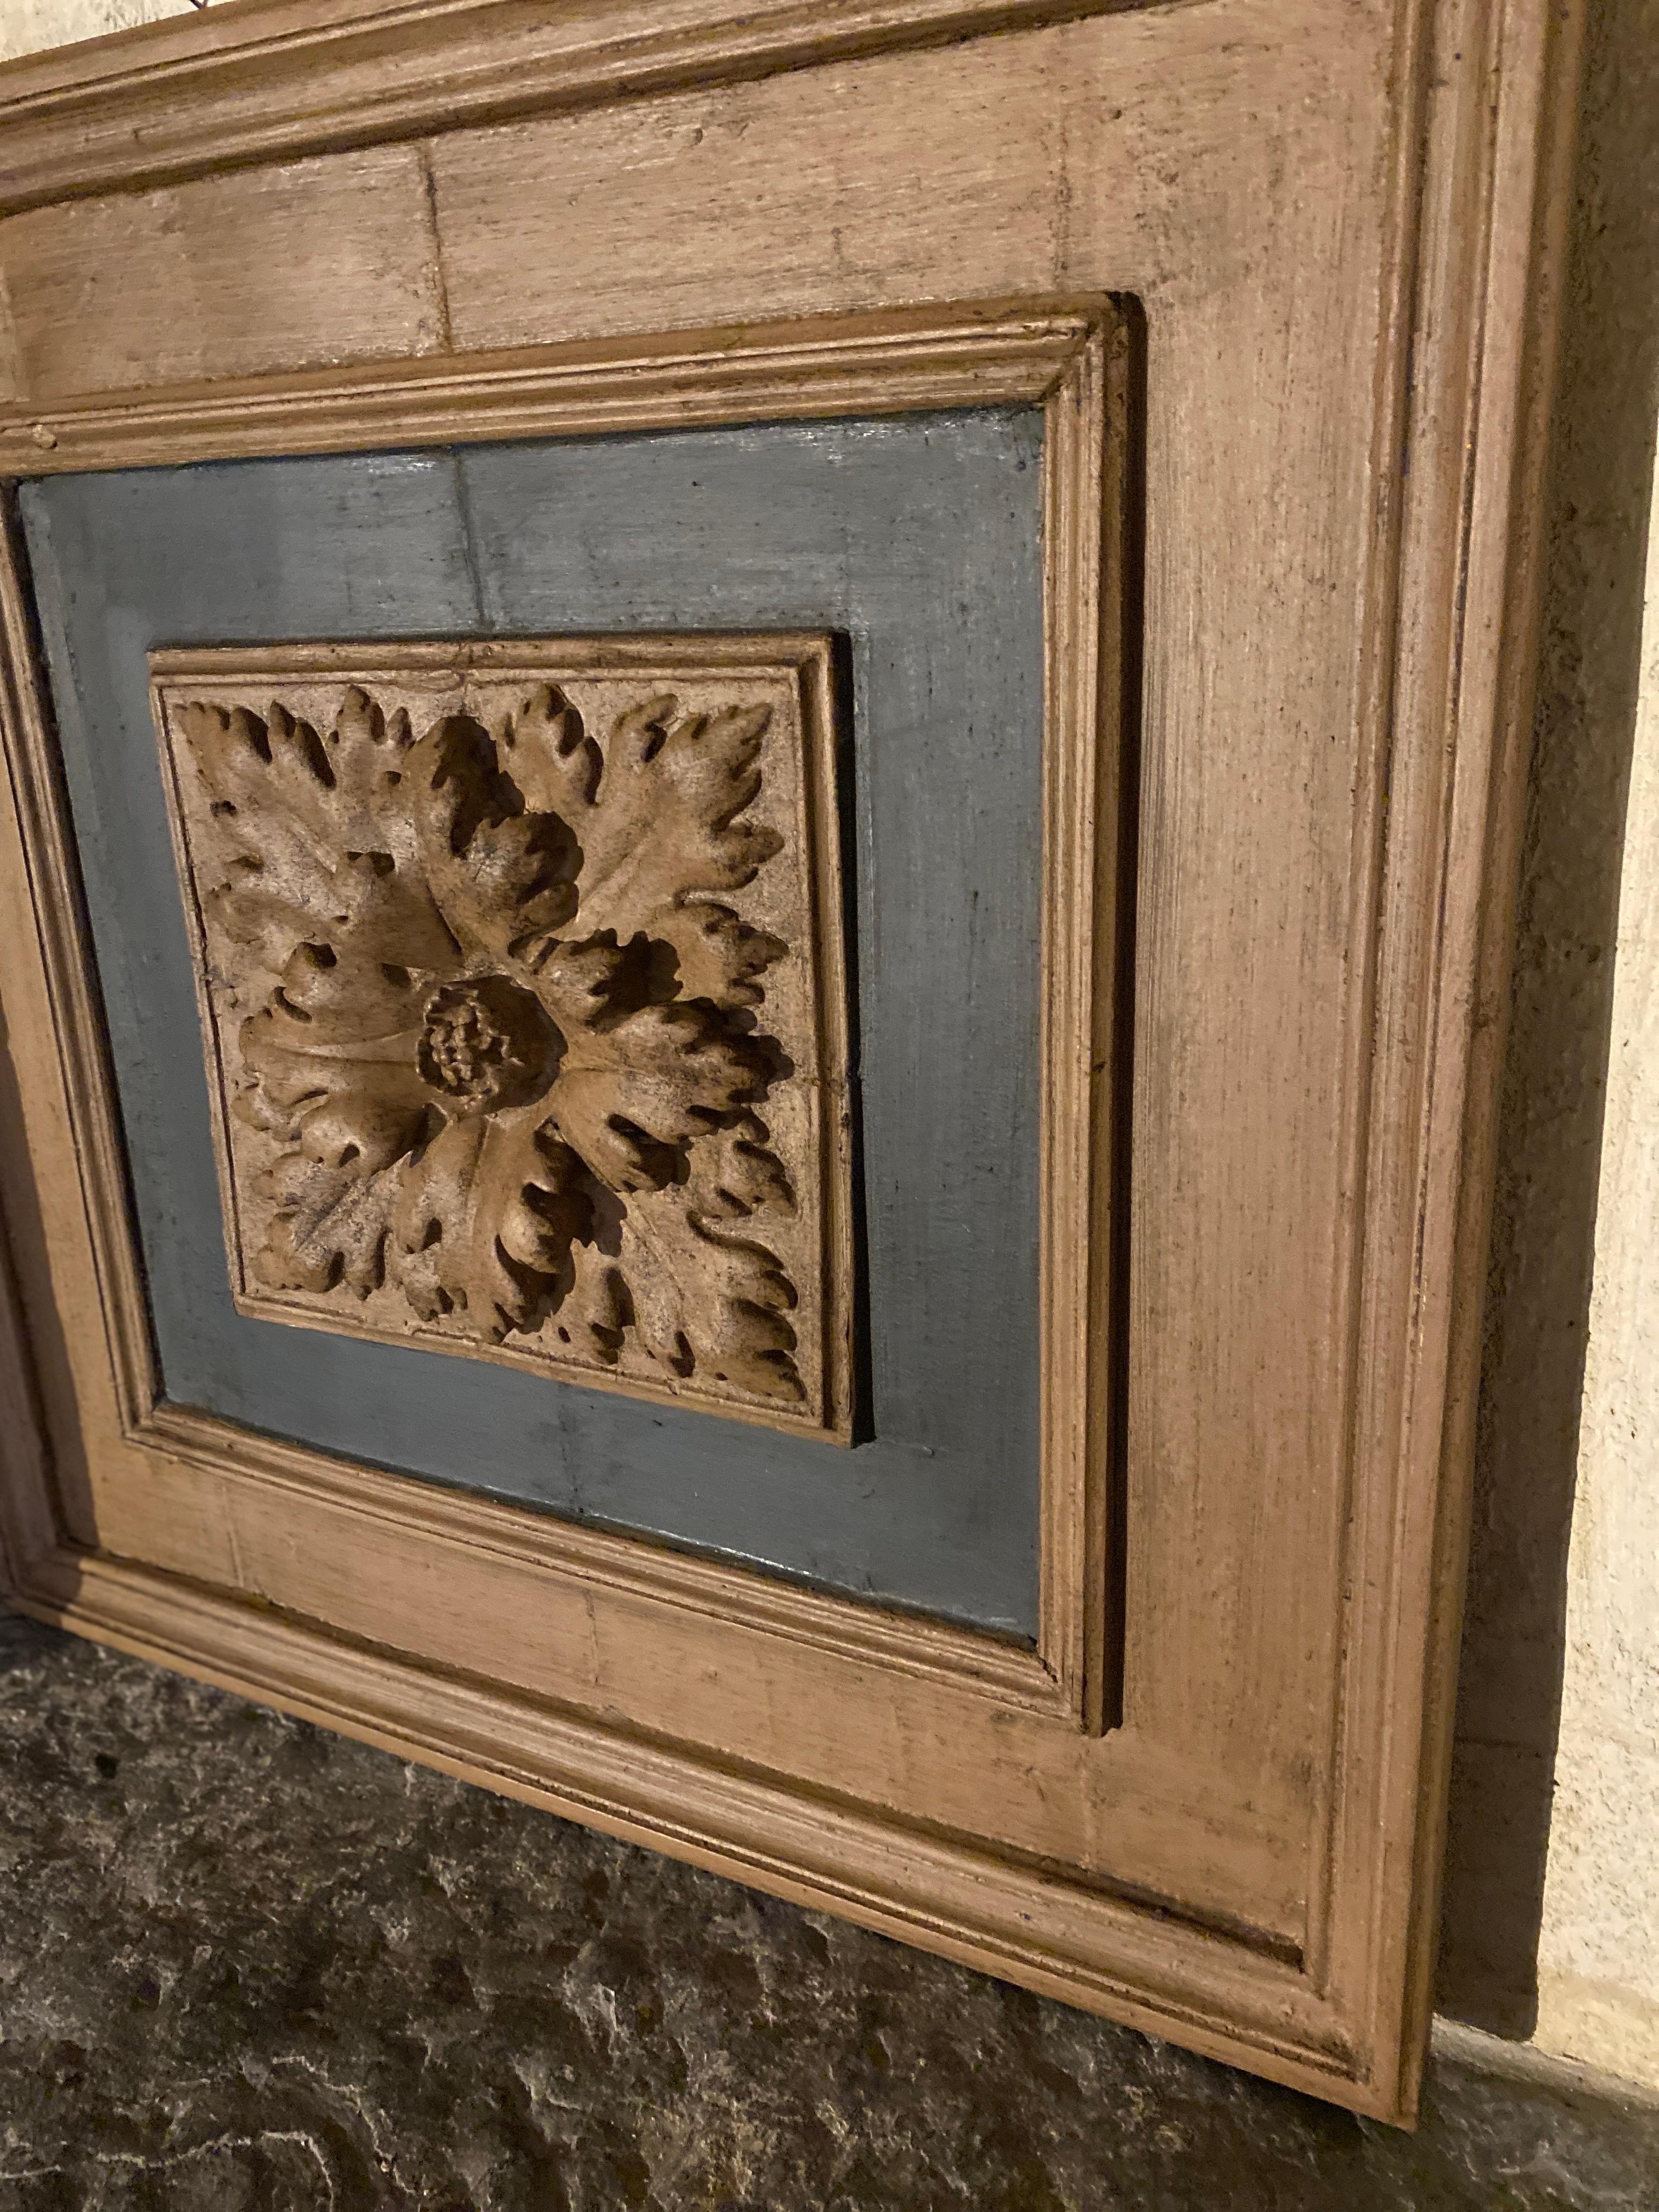 Oak old polychrome wooden coffered ceiling tiles dating from the 19th century For Sale